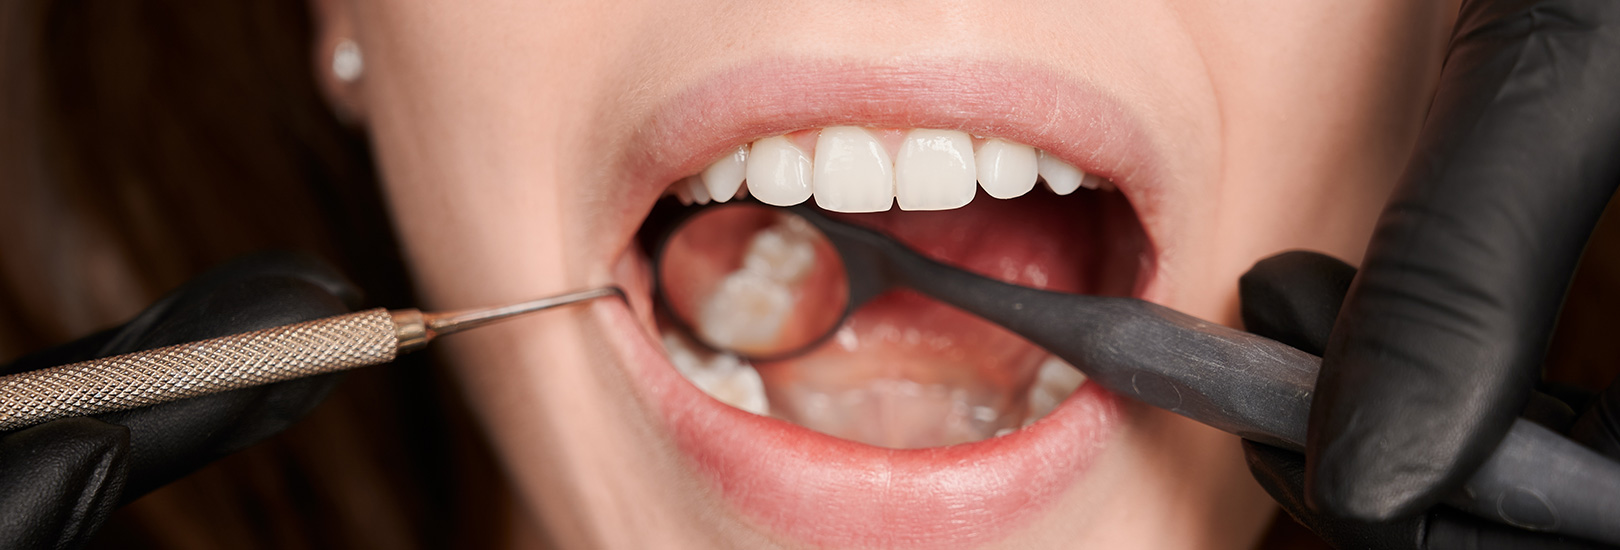 Using Spacers for Braces: What You Need to Know